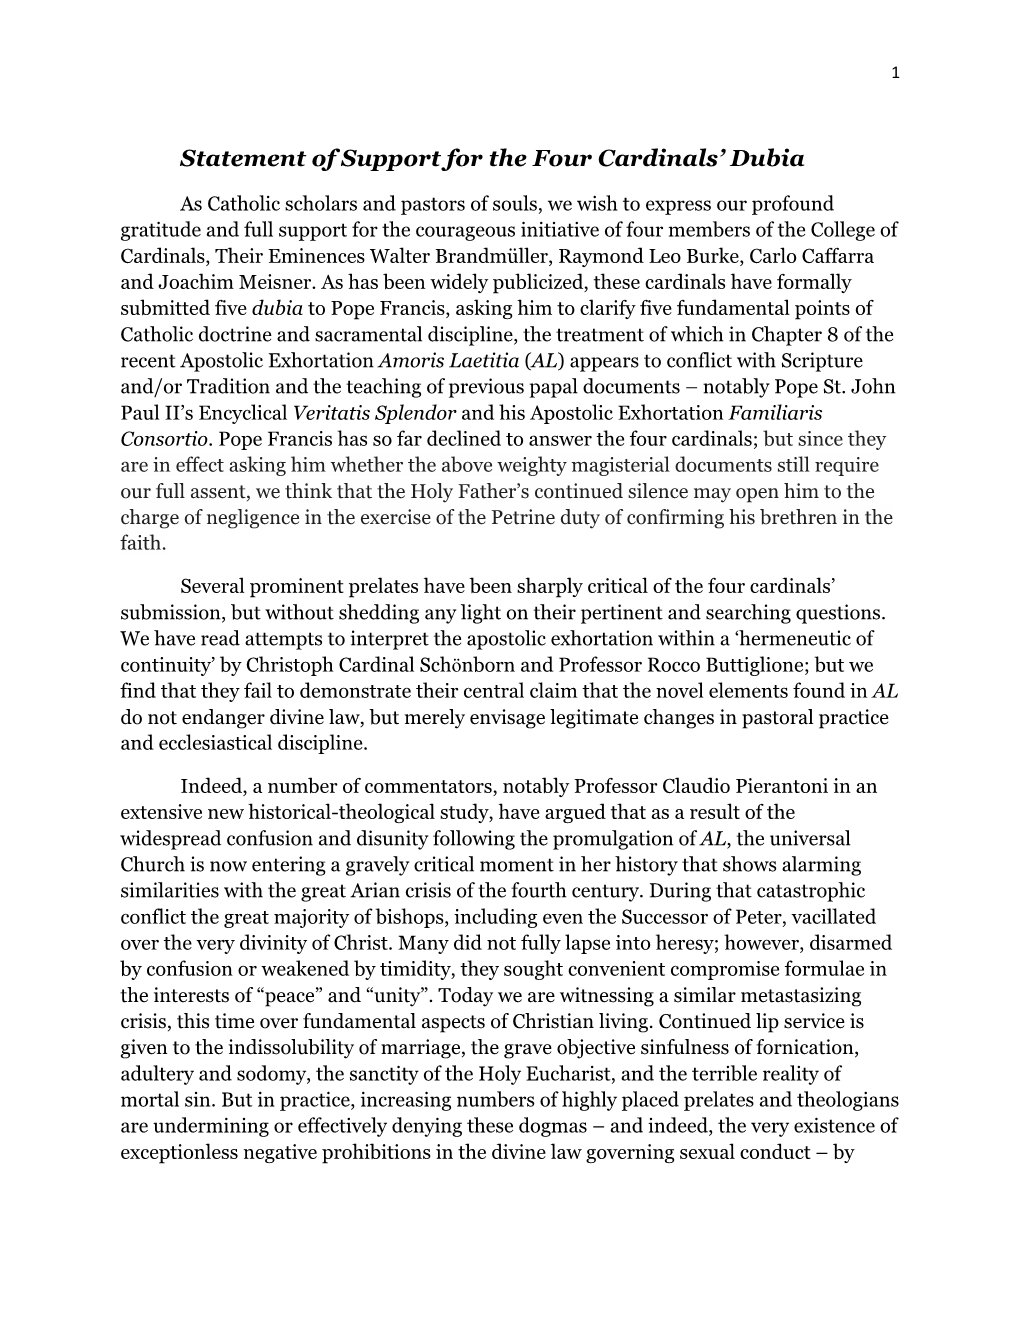 Statement of Support for the Four Cardinals' Dubia